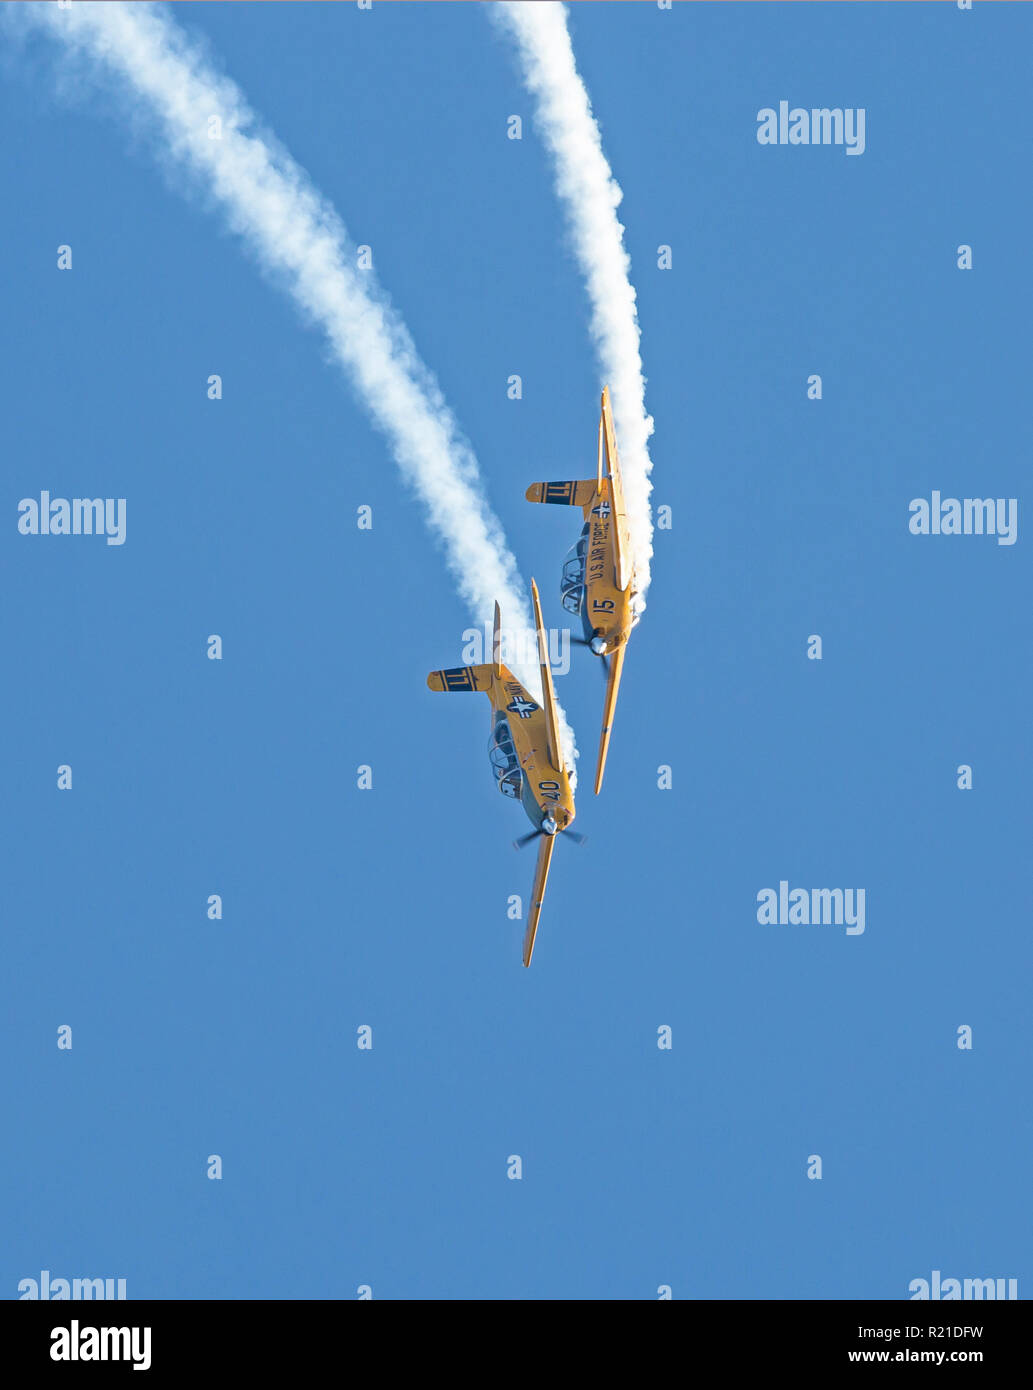 MONROE, NC (USA) - November 10, 2018: Two aerobatic aircraft perform a deep dive in a blue sky at the Warbirds Over Monroe Air Show. Stock Photo